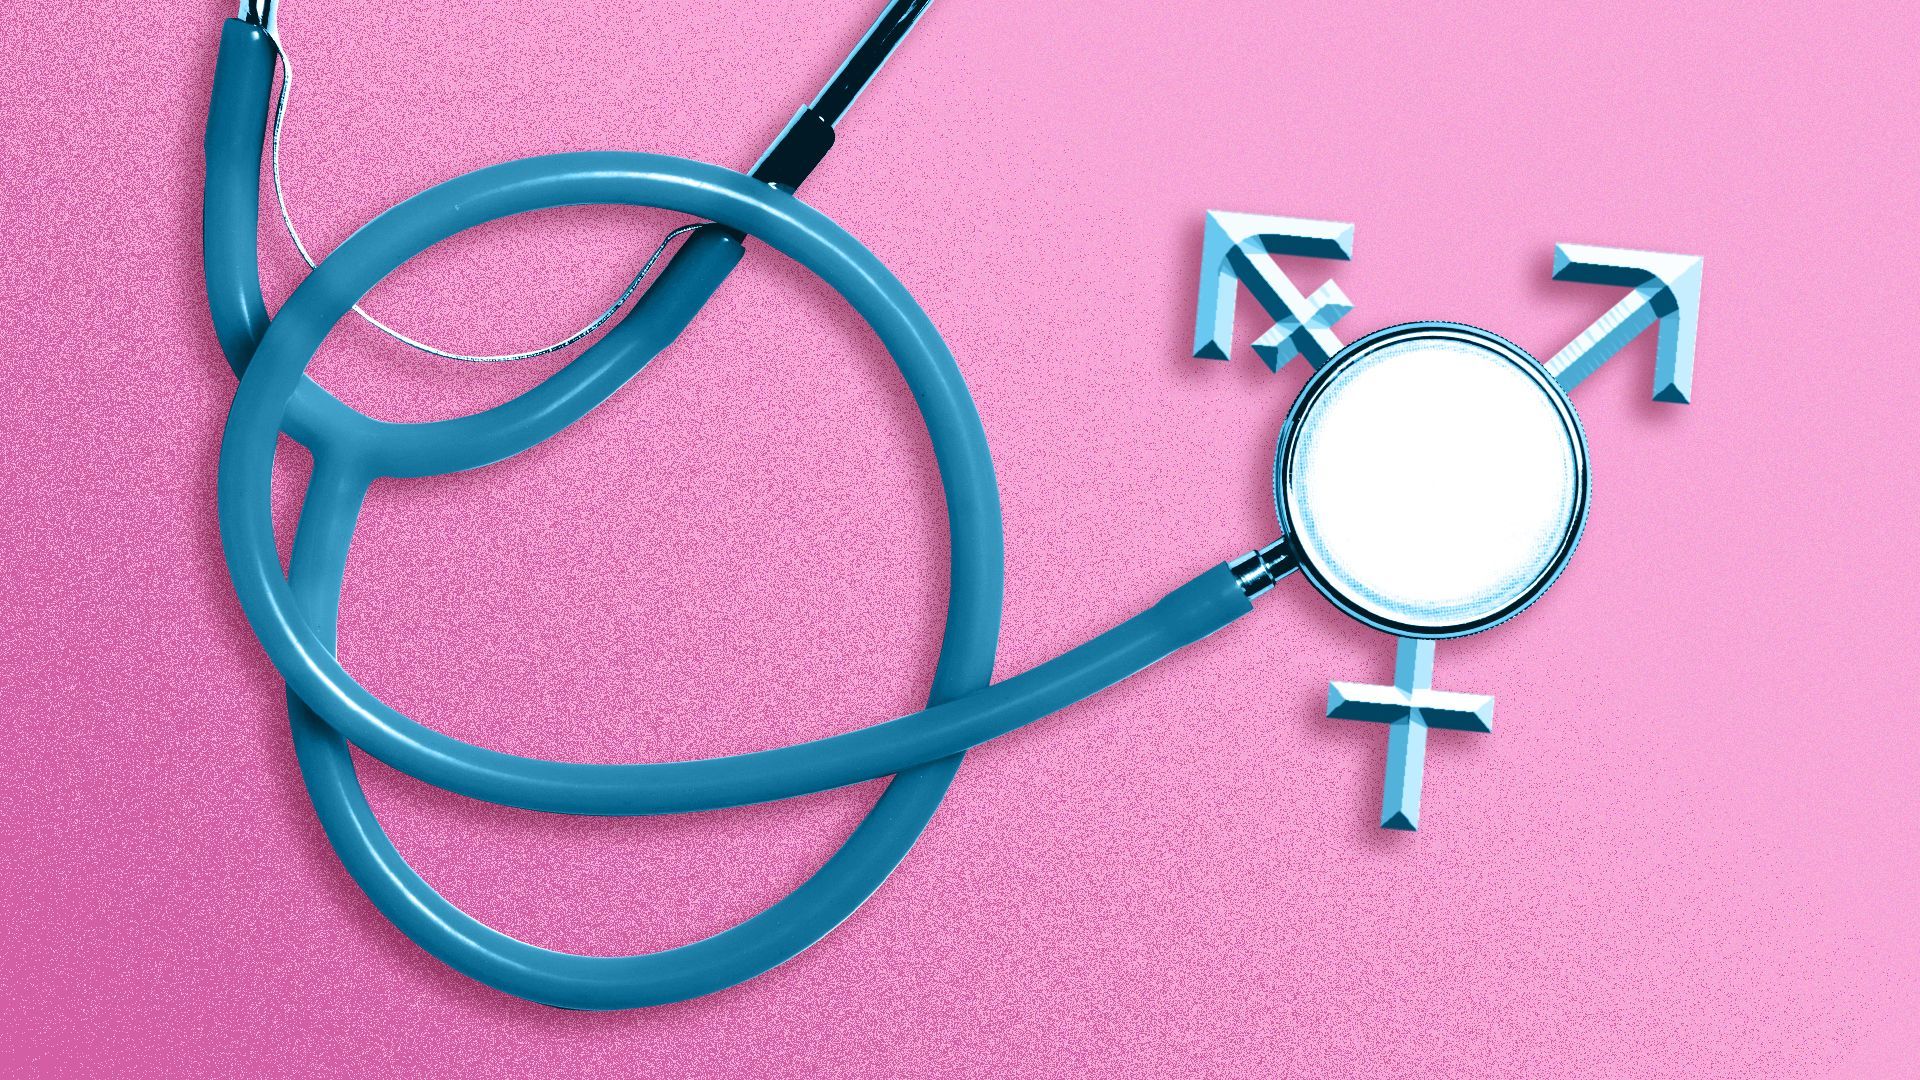 Illustration of a stethoscope with the transgender icon as the chest piece.